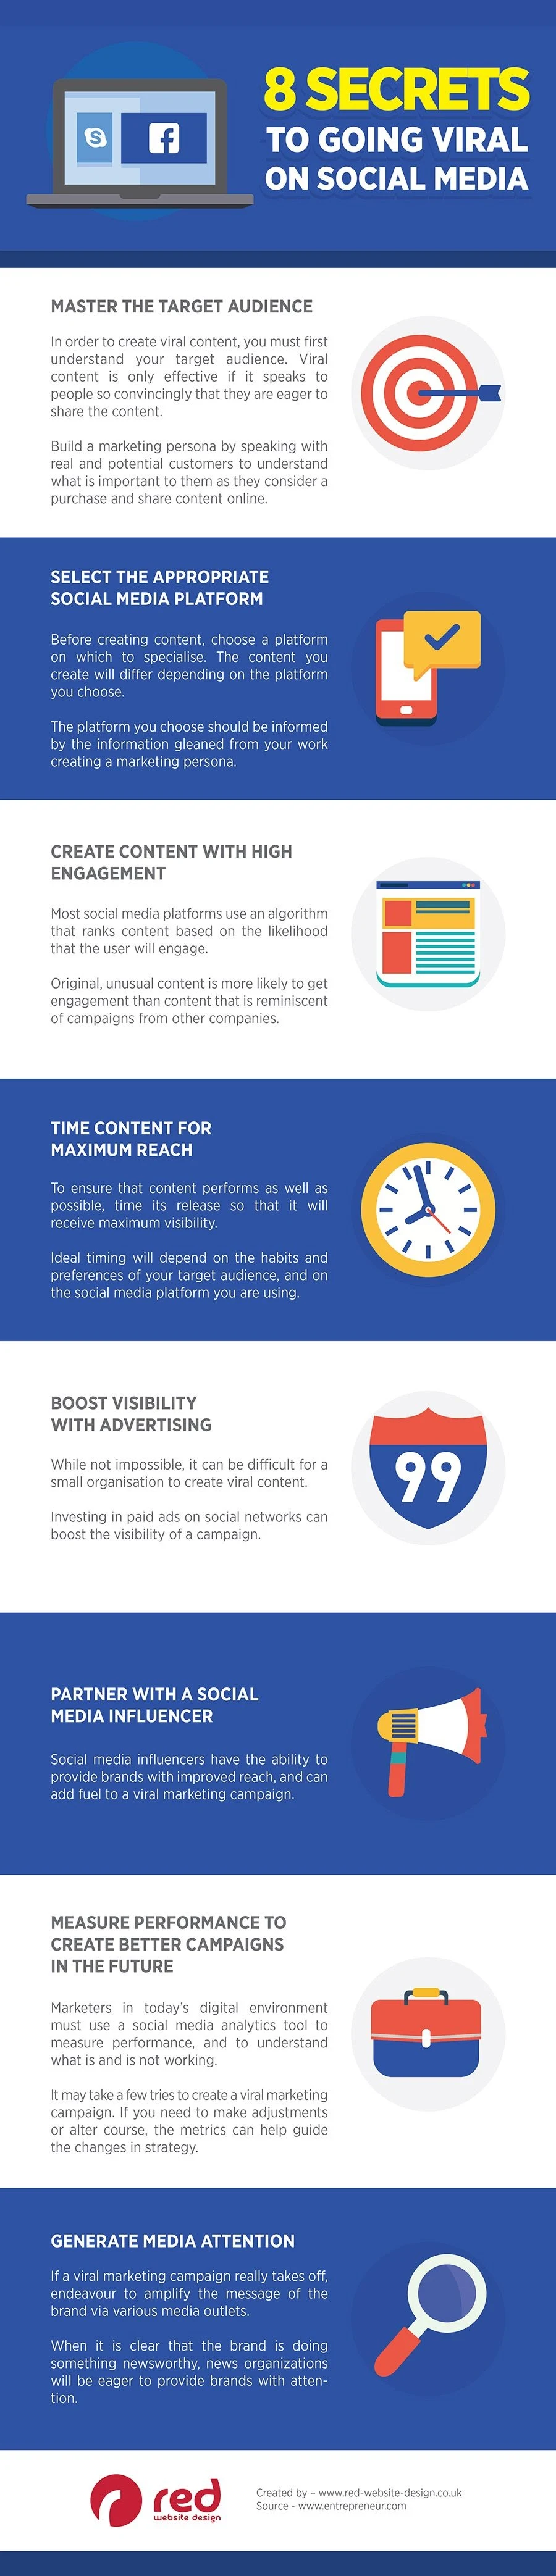 8 Secrets to Going Viral on Social Media - #Infographic